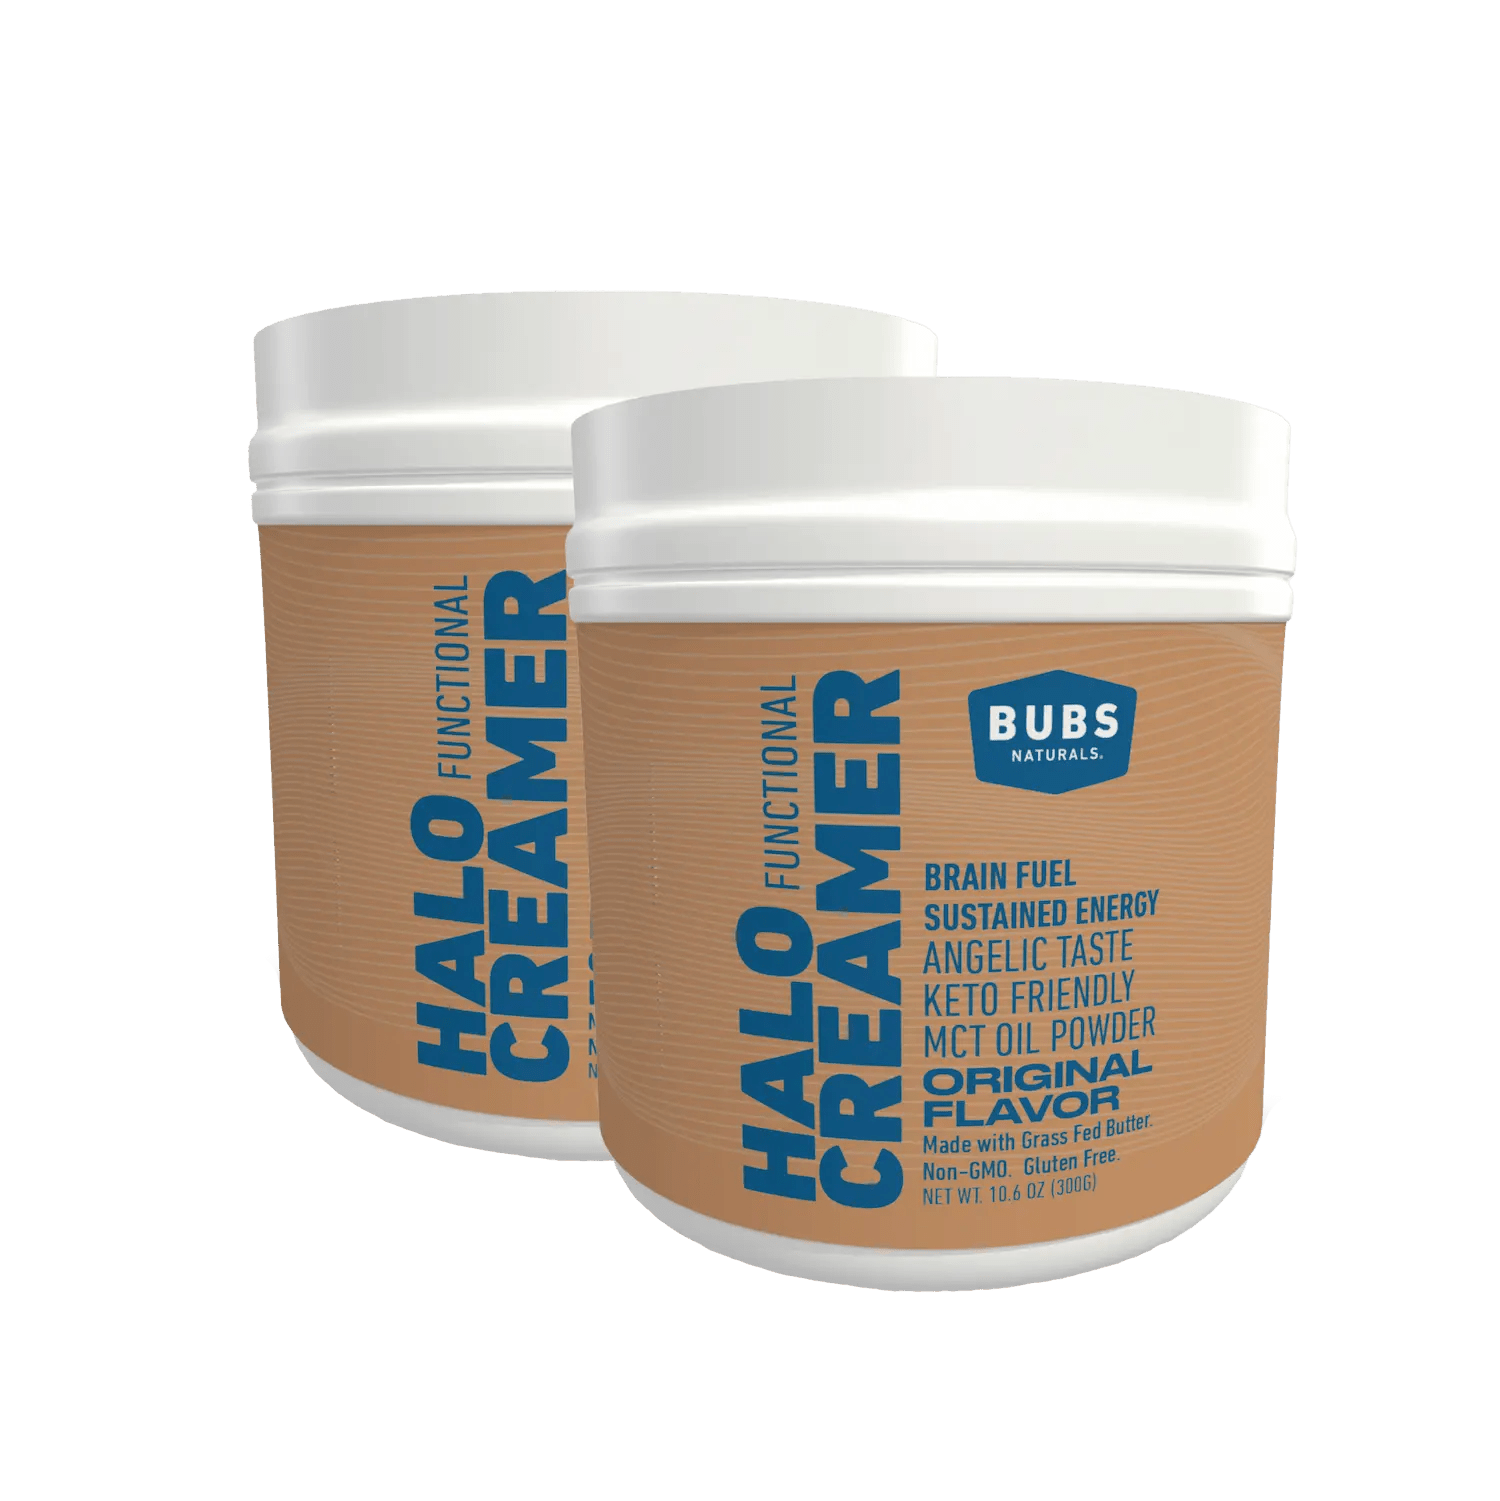 10.6oz BUBS Naturals Halo Creamer with MCT Oil Powder and Grass Fed Butter, Bundle of 2